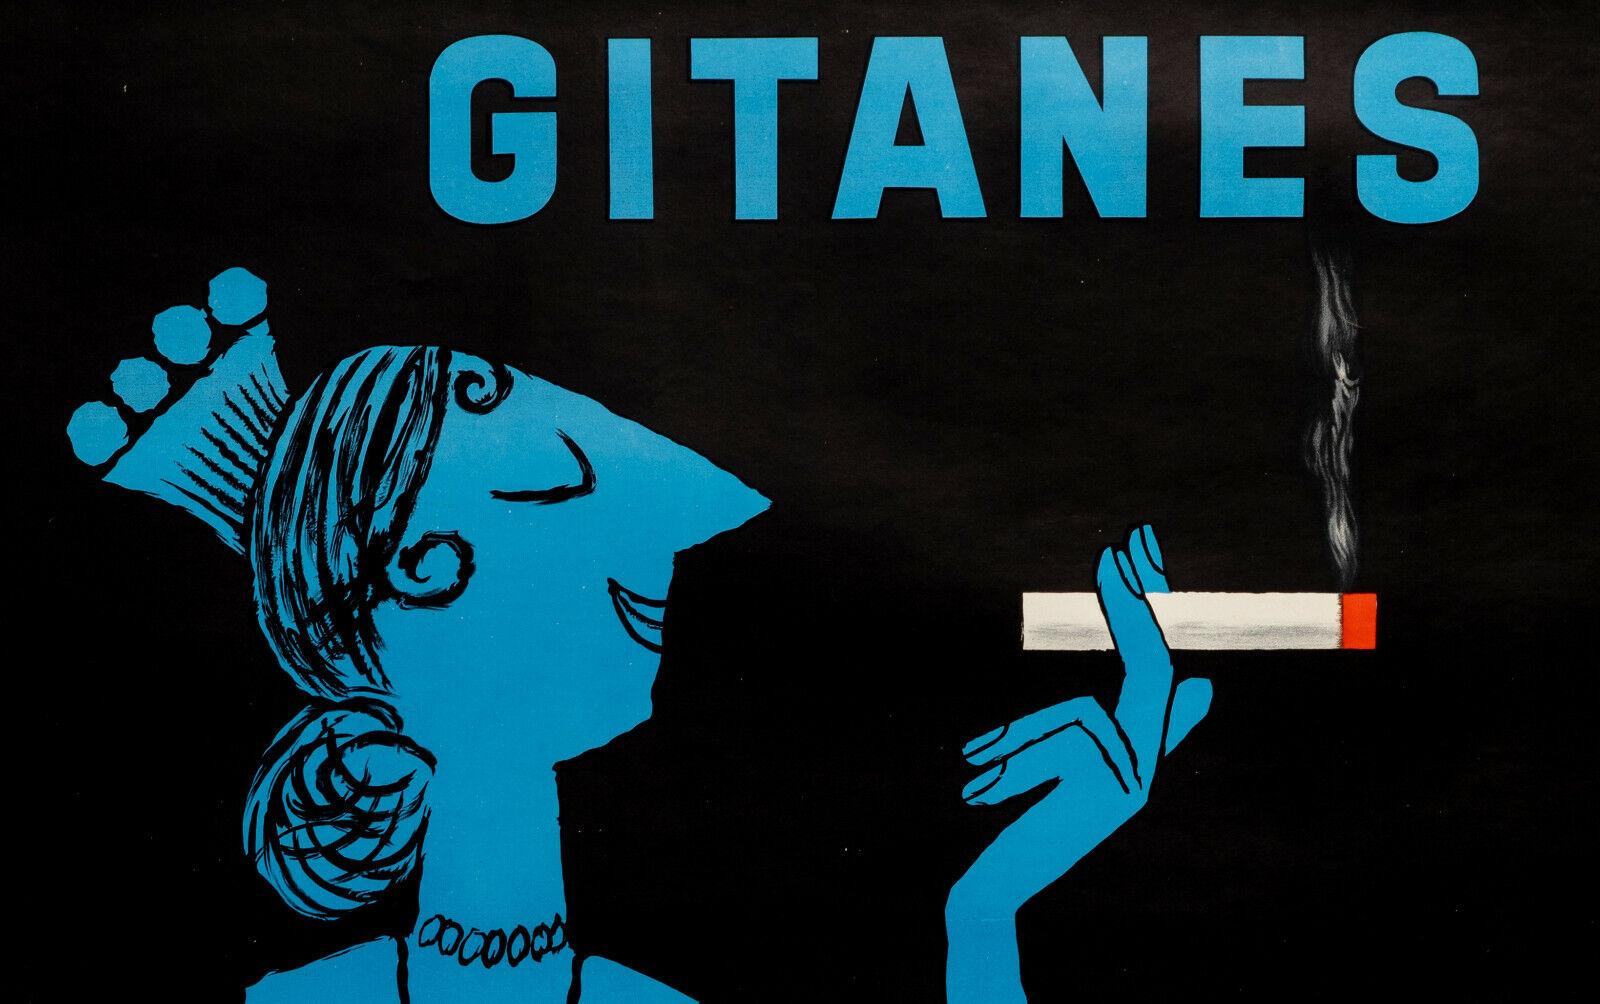 Original Vintage Poster-Raymond Savignac-Gitanes-Tabaco-French, 1953

Poster for the promotion of Gitanes Cigarettes, we see a woman in Blue, green and yellow, smoking a cigarette . 

Additional Details: 
Materials and Techniques: Colour